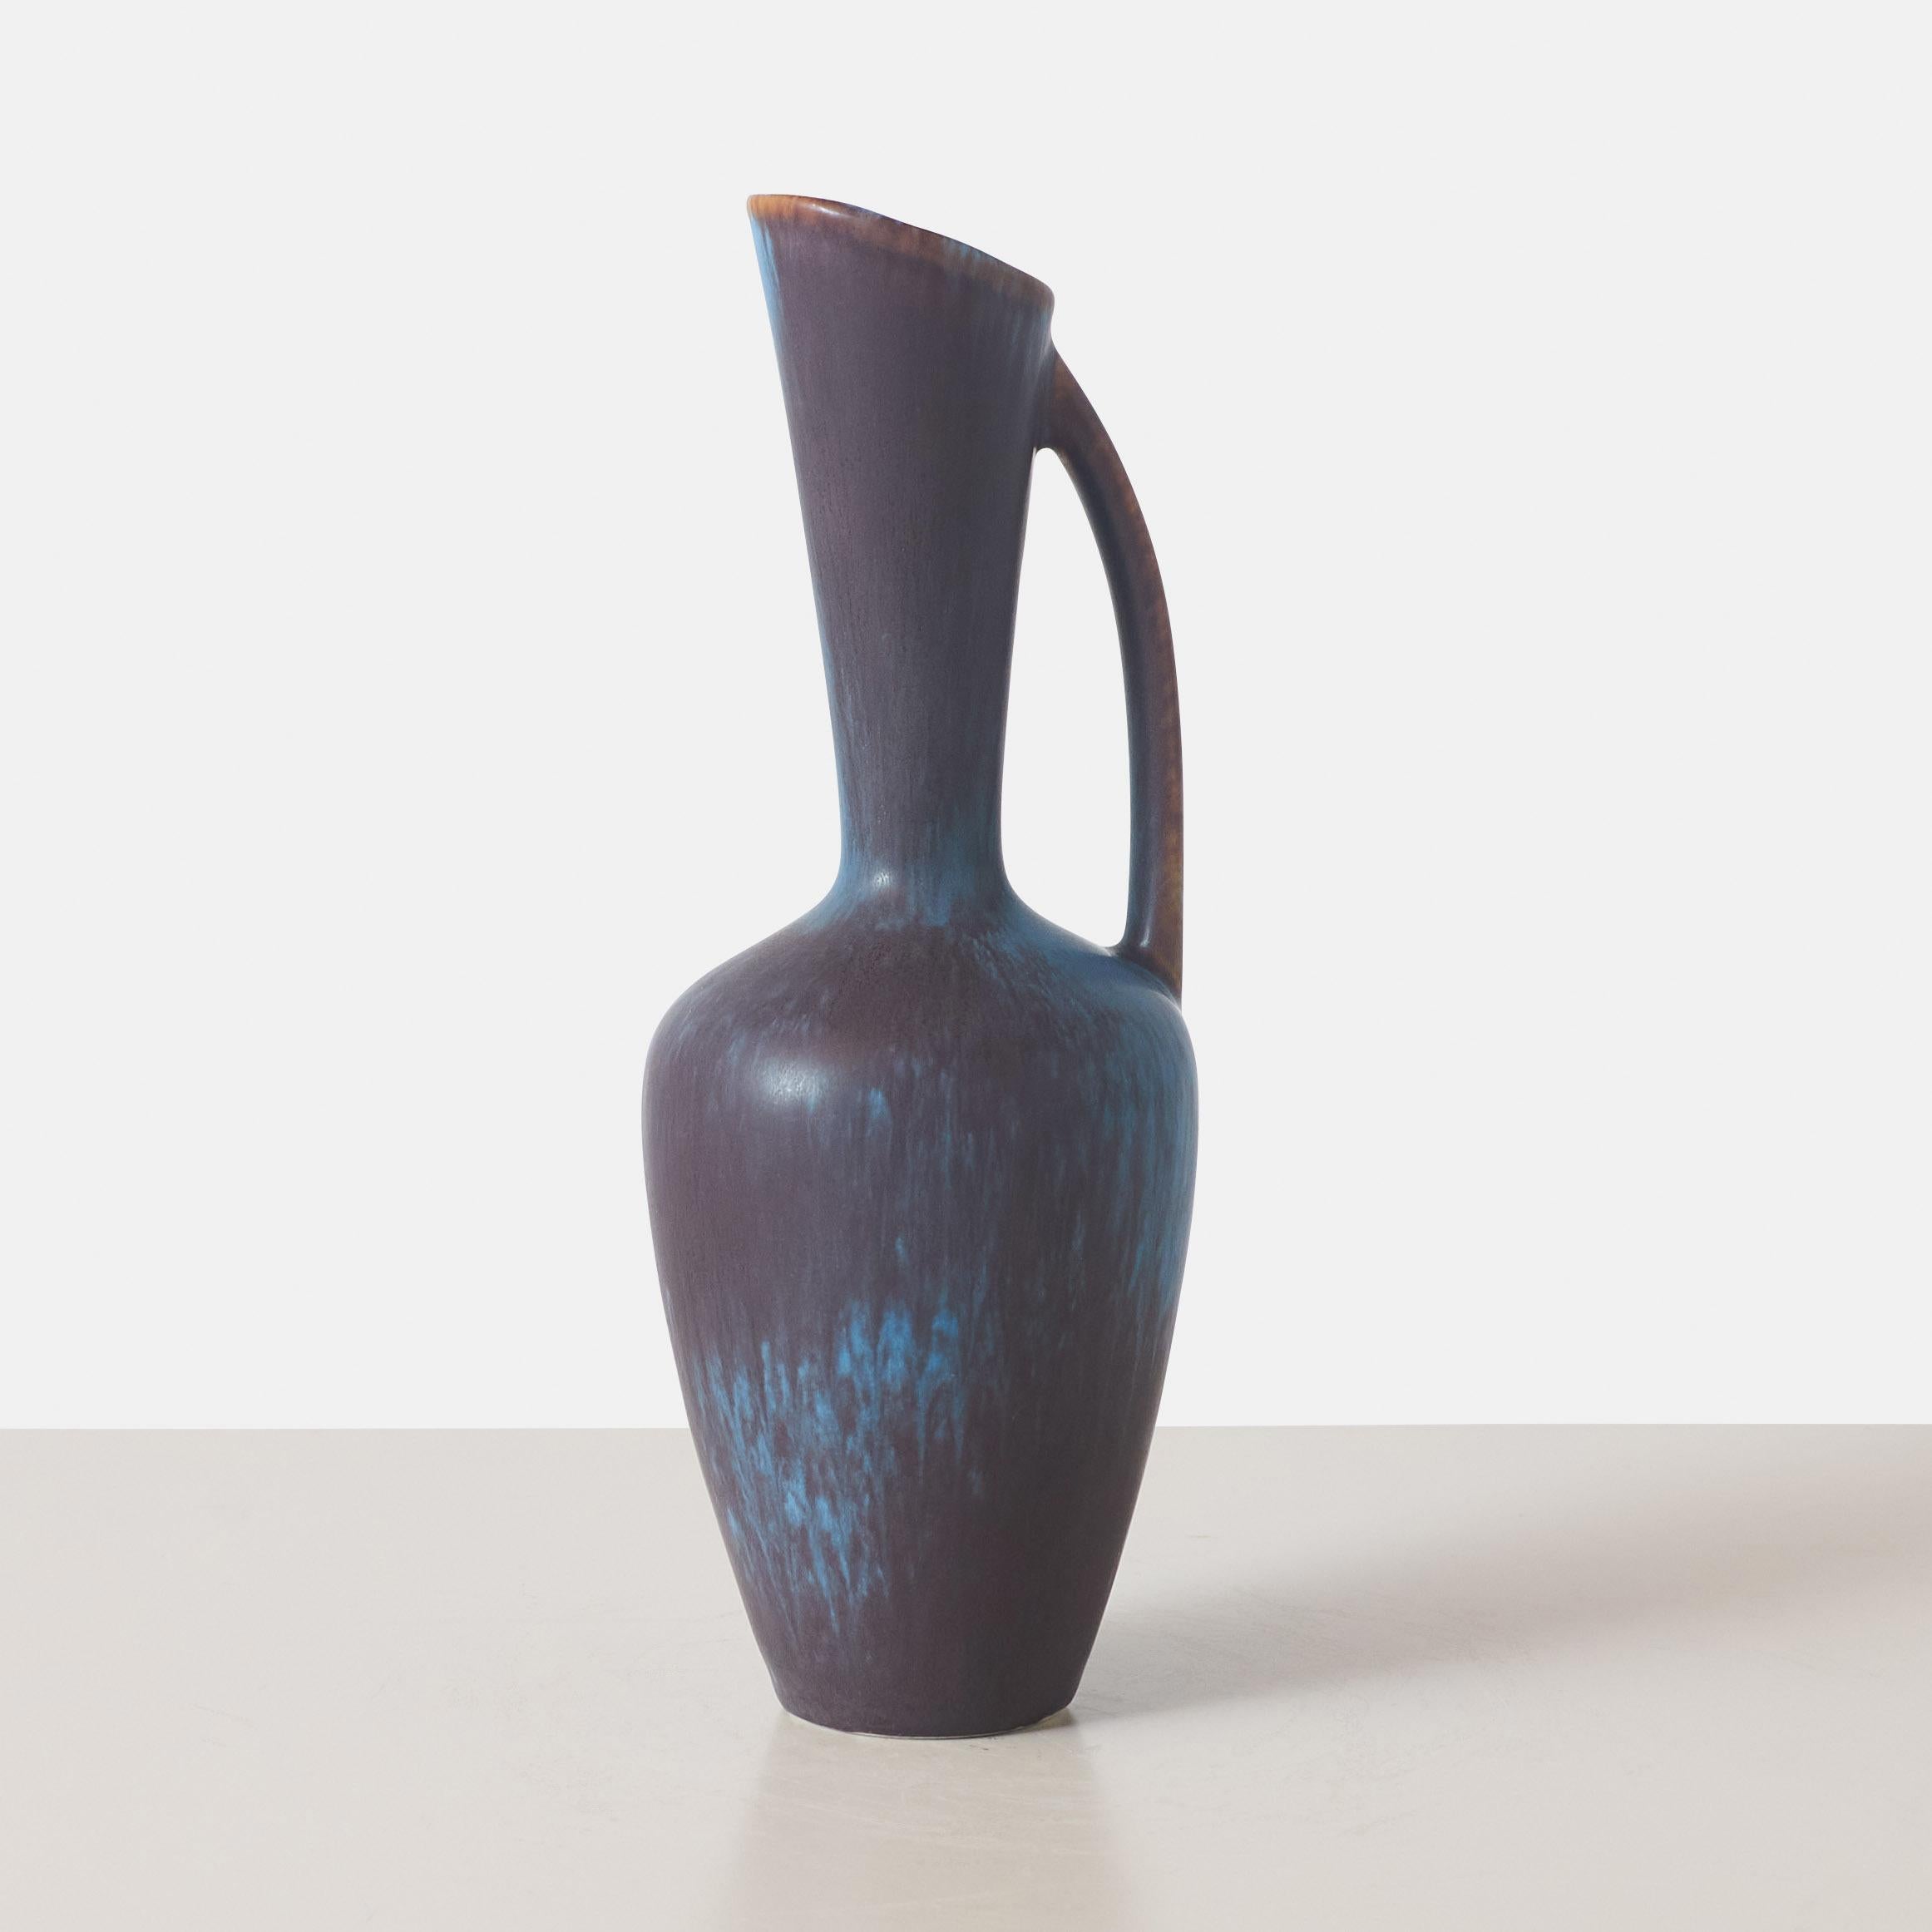 An elegant ceramic vase by Gunnar Nyland with a tall spouted neck and curved handle in shades of blue. Made for Rorstrand, inscribed with Rorstrand mark and GN AXQ.